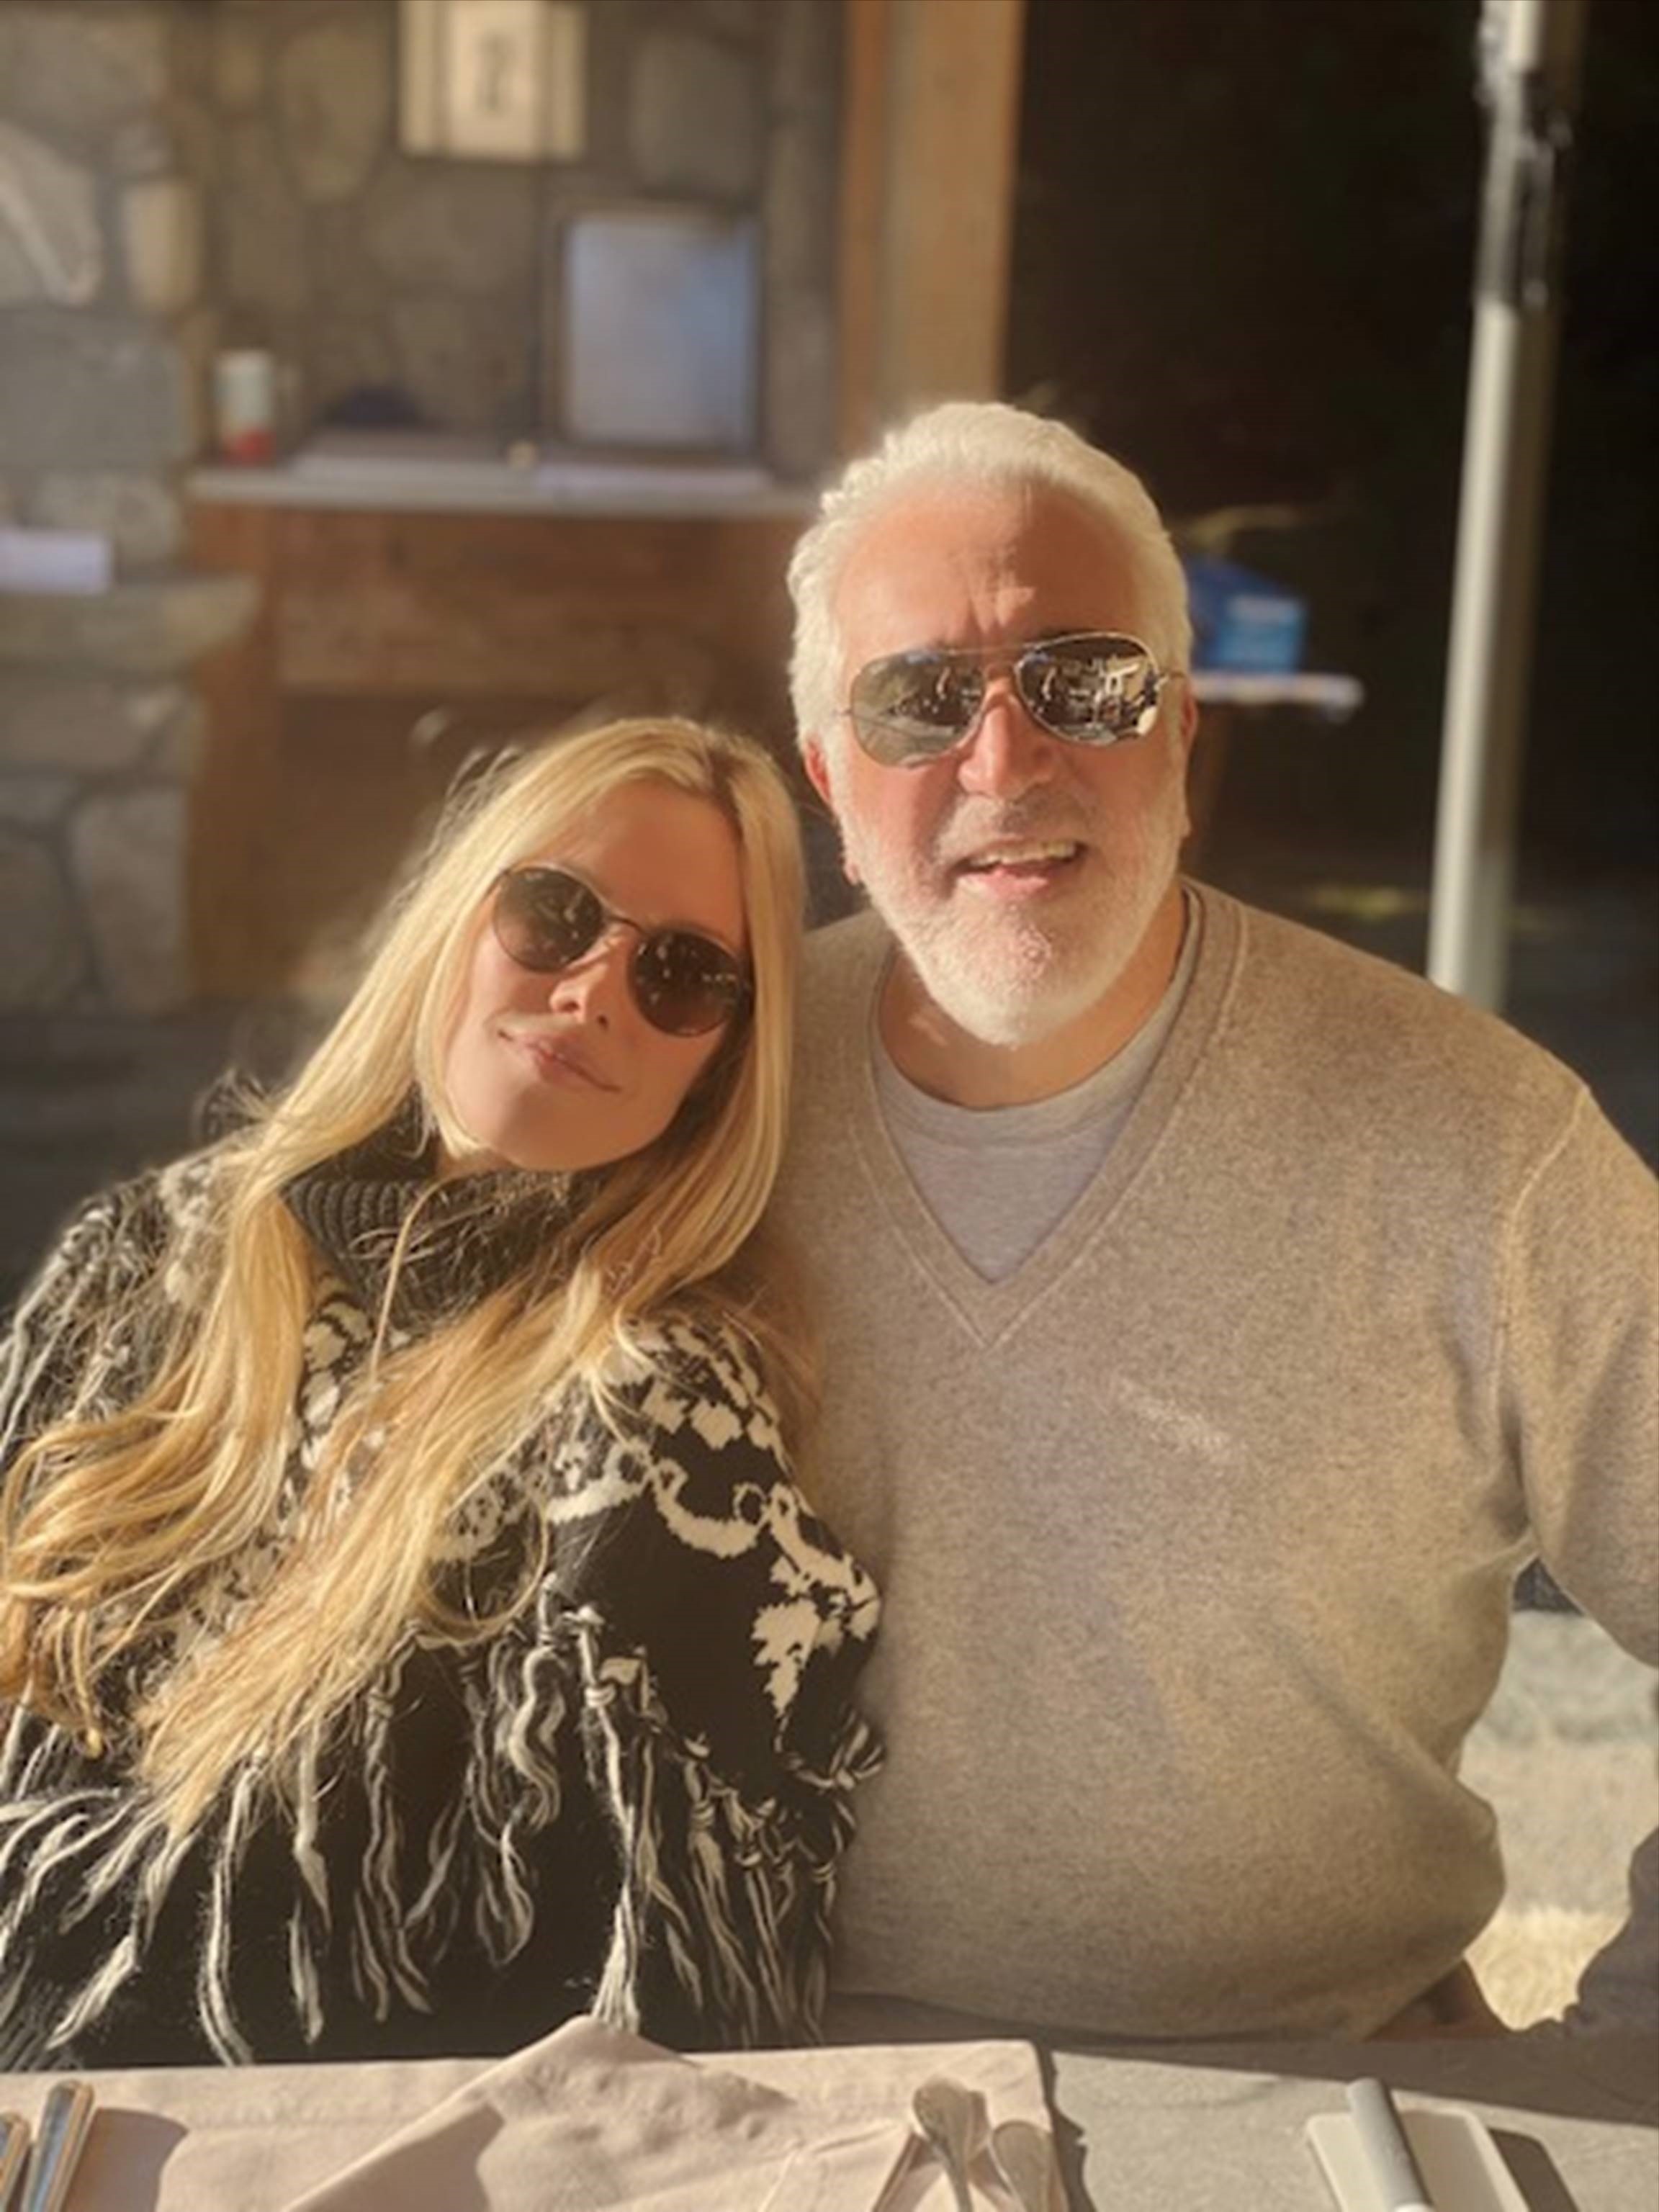 Lawrence Stroll and his wife Raquel Stroll together